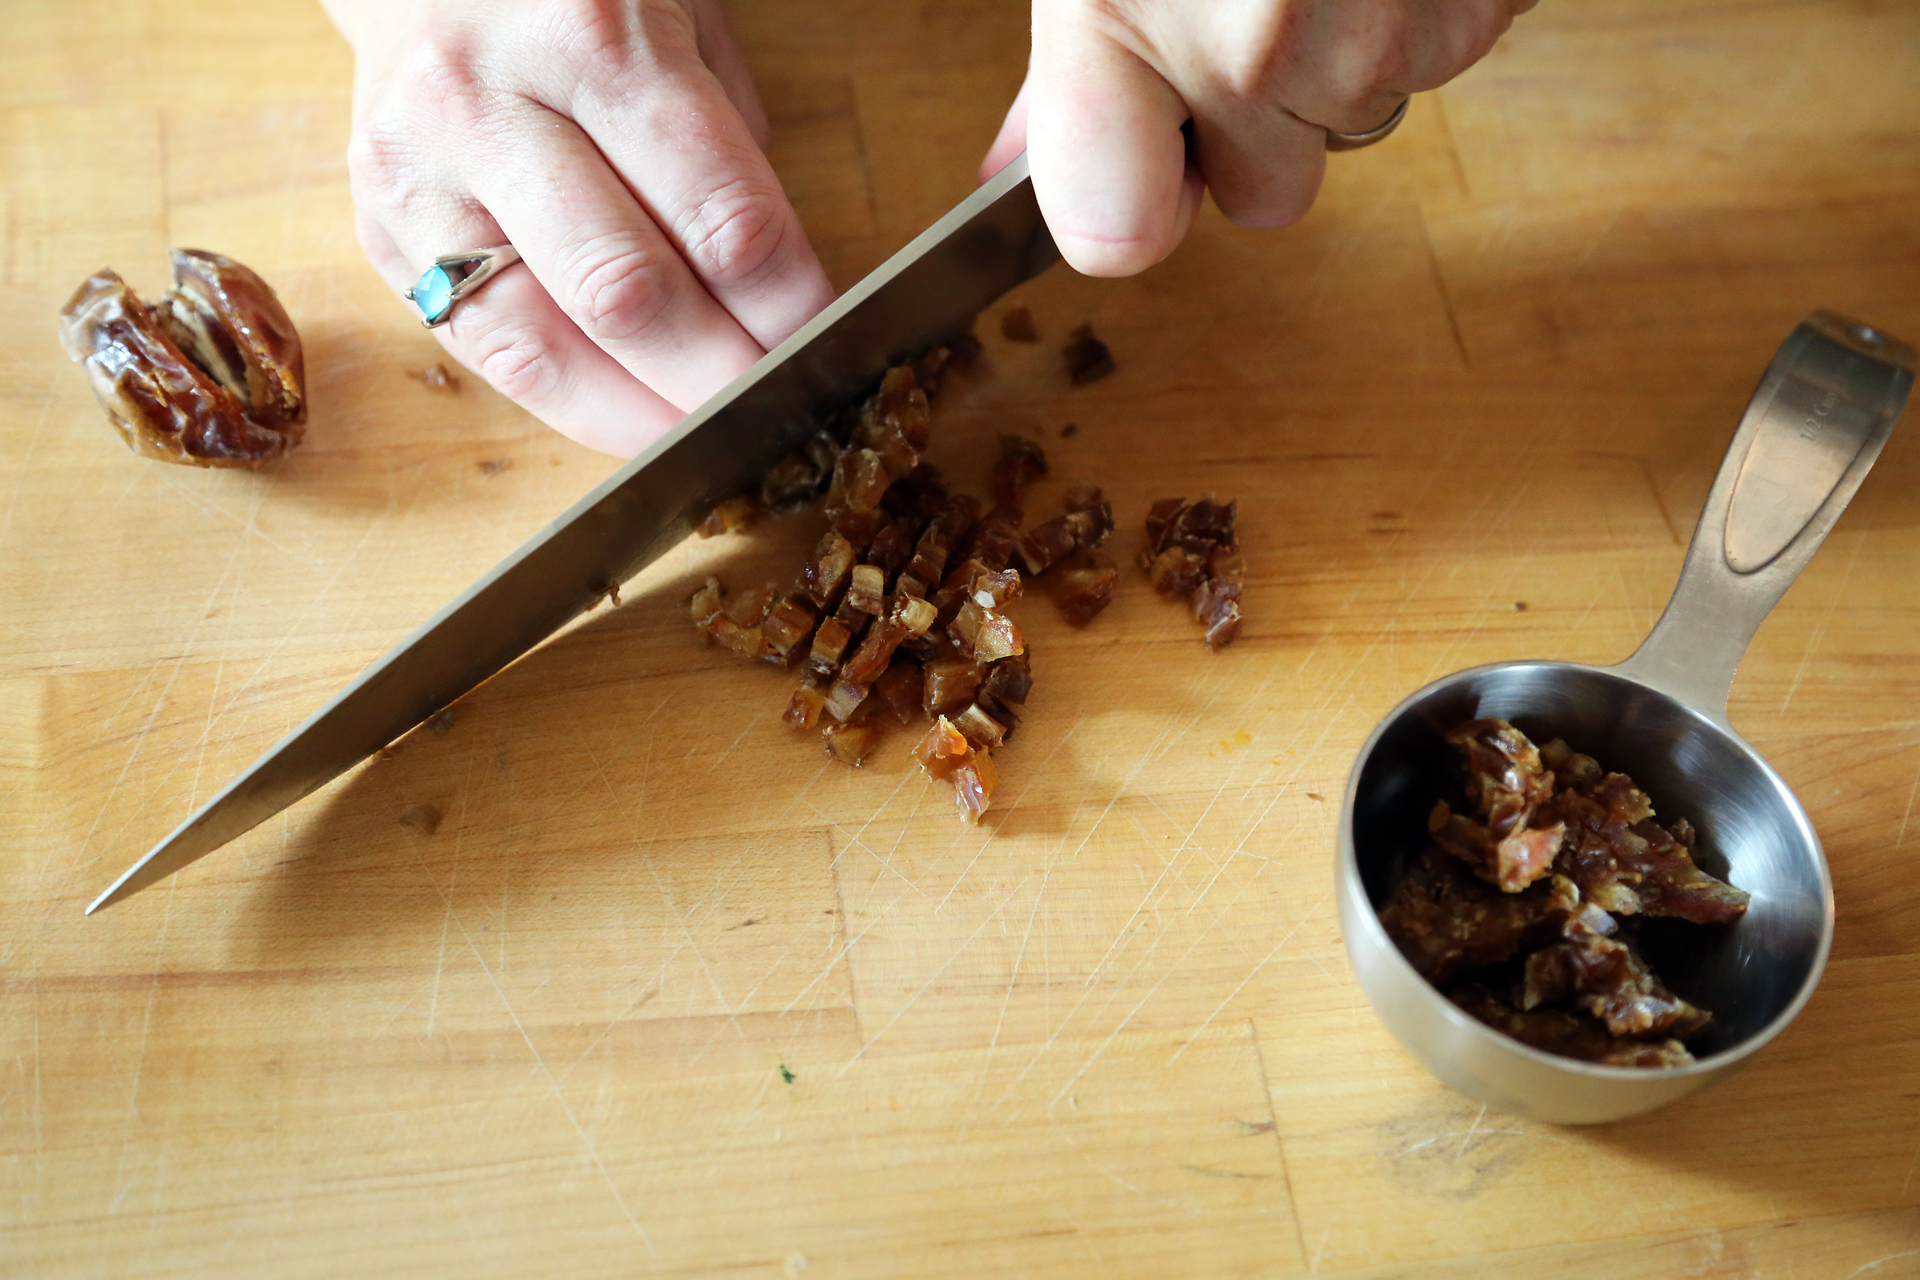  Pit and finely chop the dates.